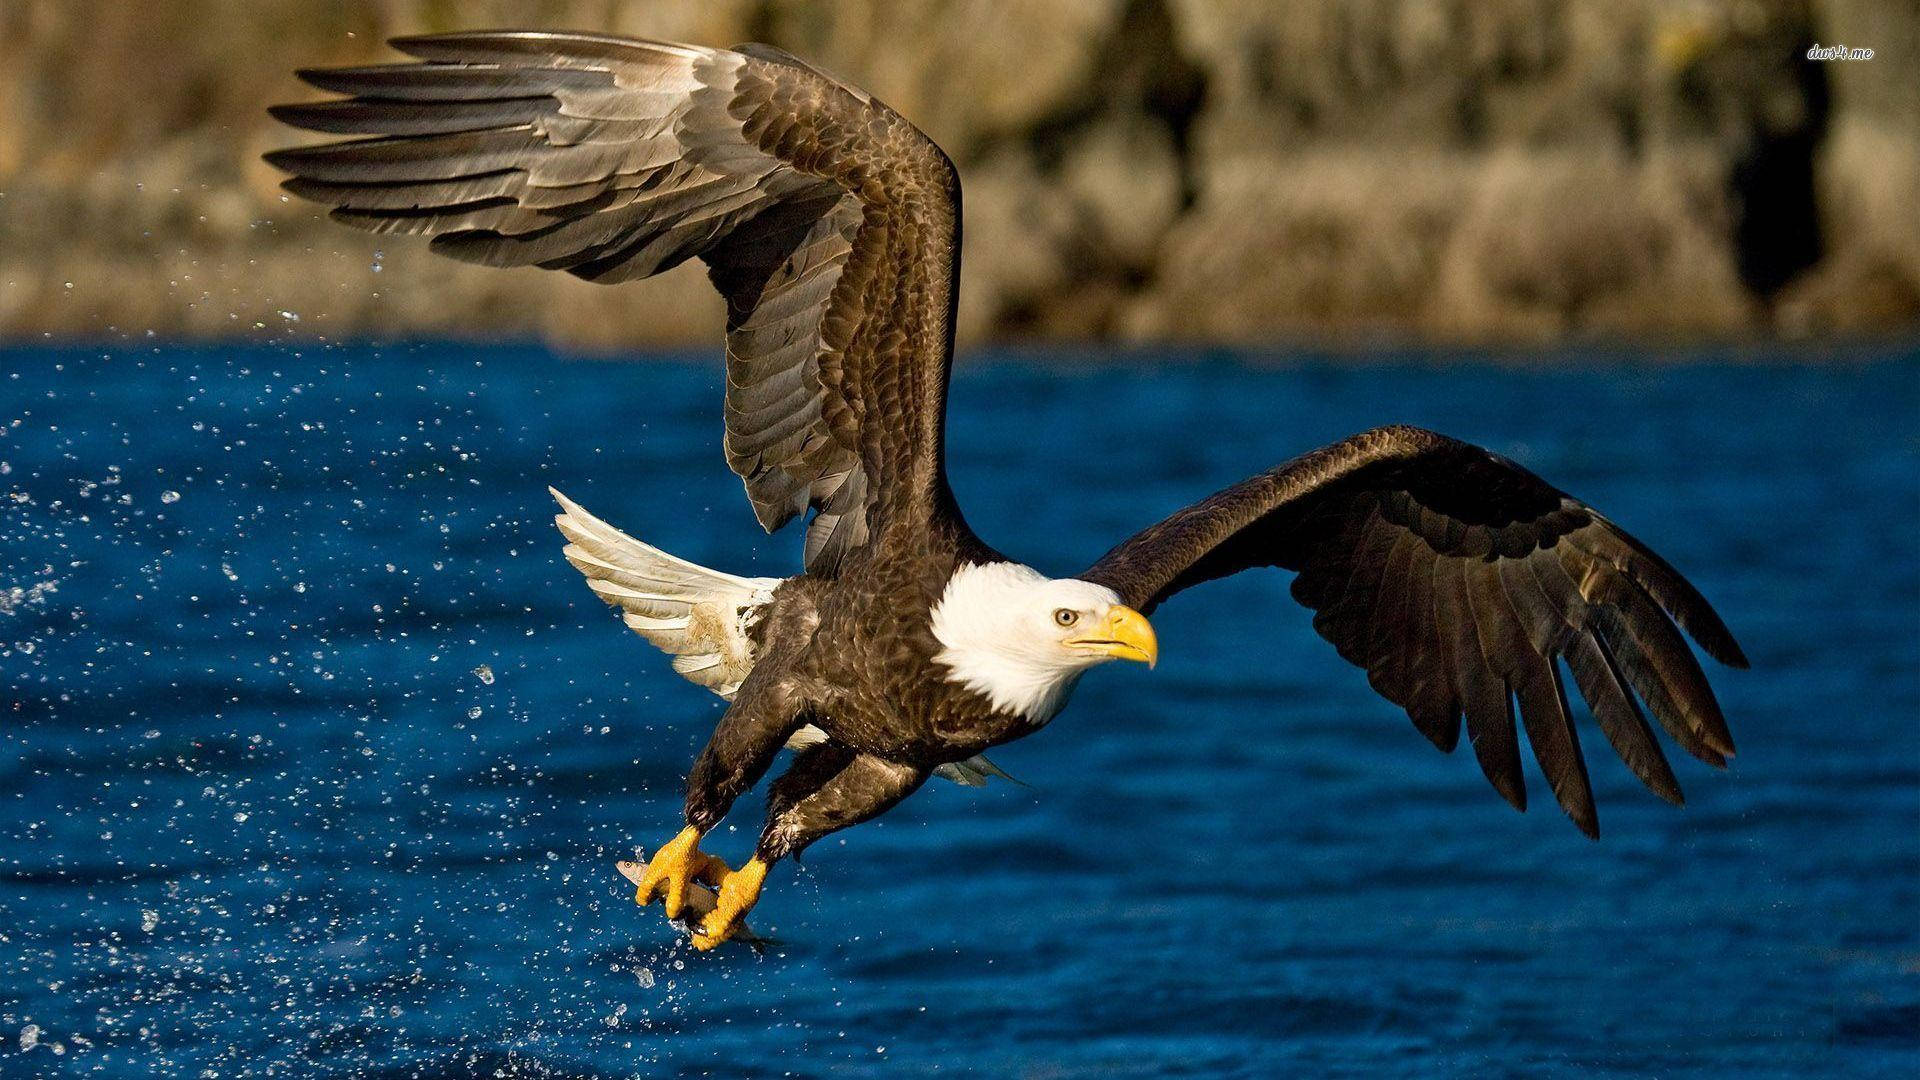 Us Eagle Glide On Water Background